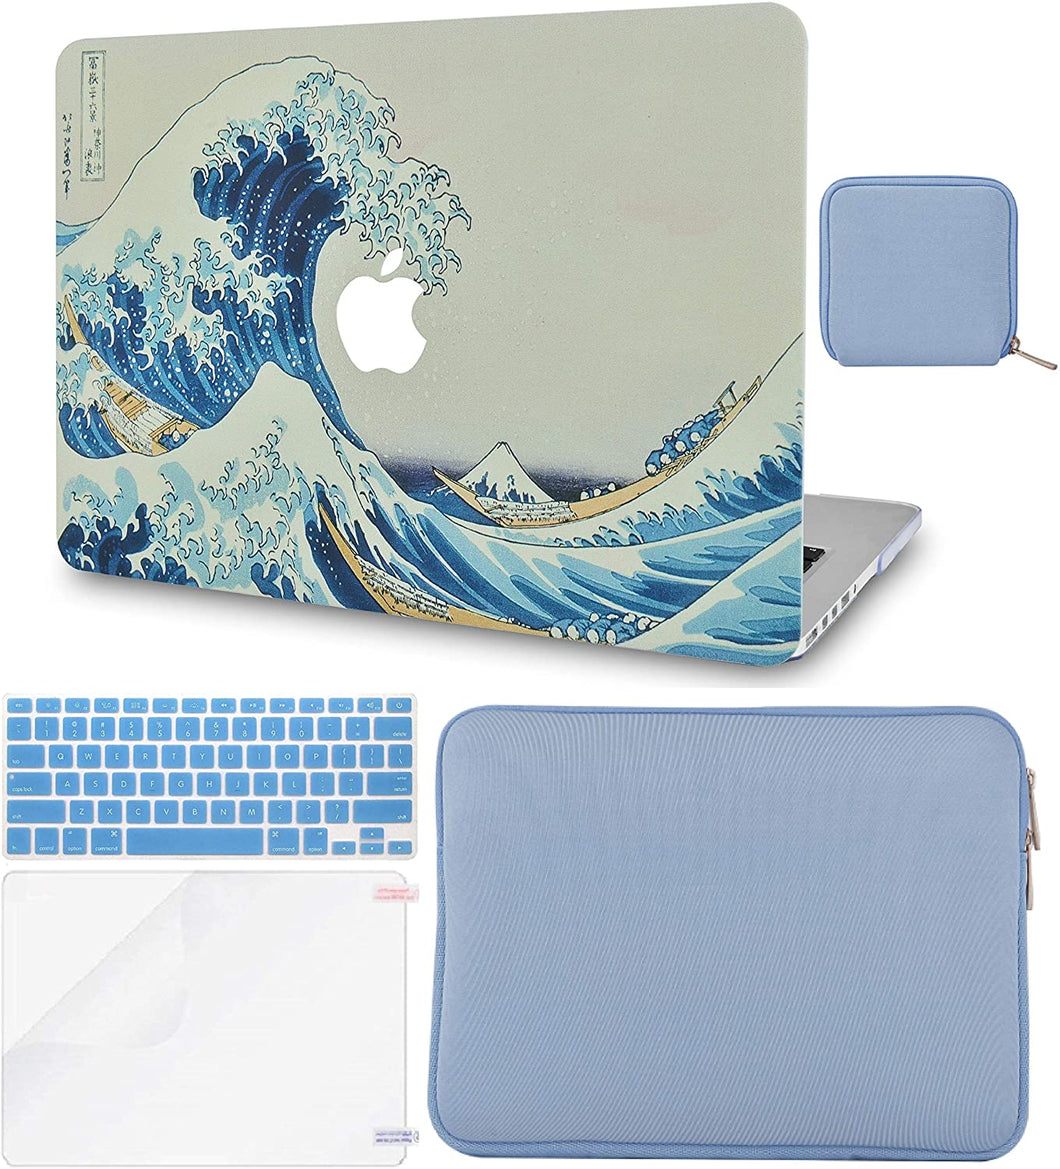 LuvCase Macbook Case 5 in 1 Bundle - Marble Collection - Japanese Wave with Slim Sleeve, Keyboard Cover, Screen Protector and Pouch